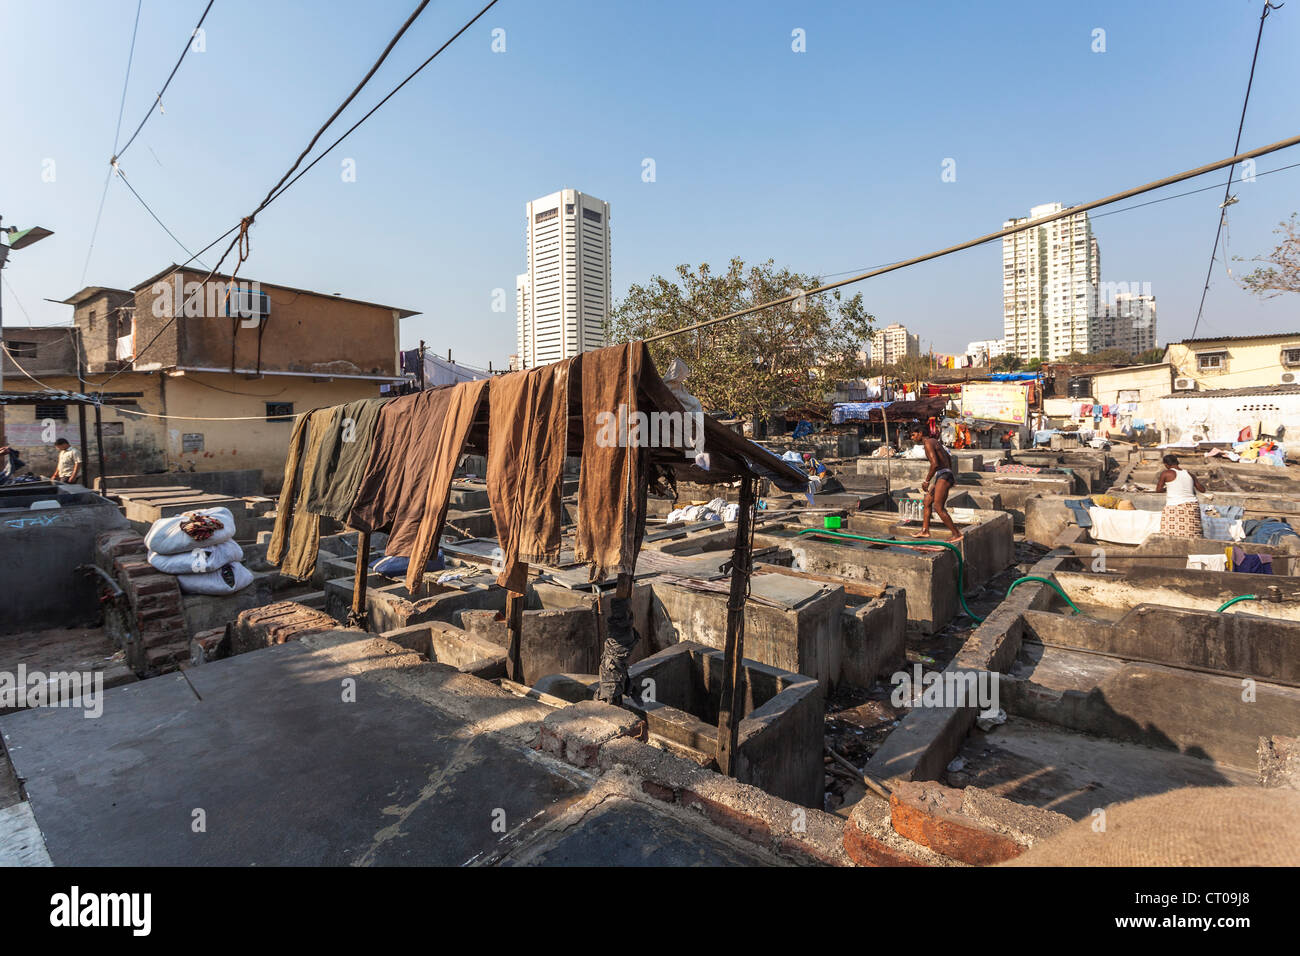 Clothes hanging out to dry in the sun in the open-air laundry, Dhobi Ghat, Mumbai, India Stock Photo